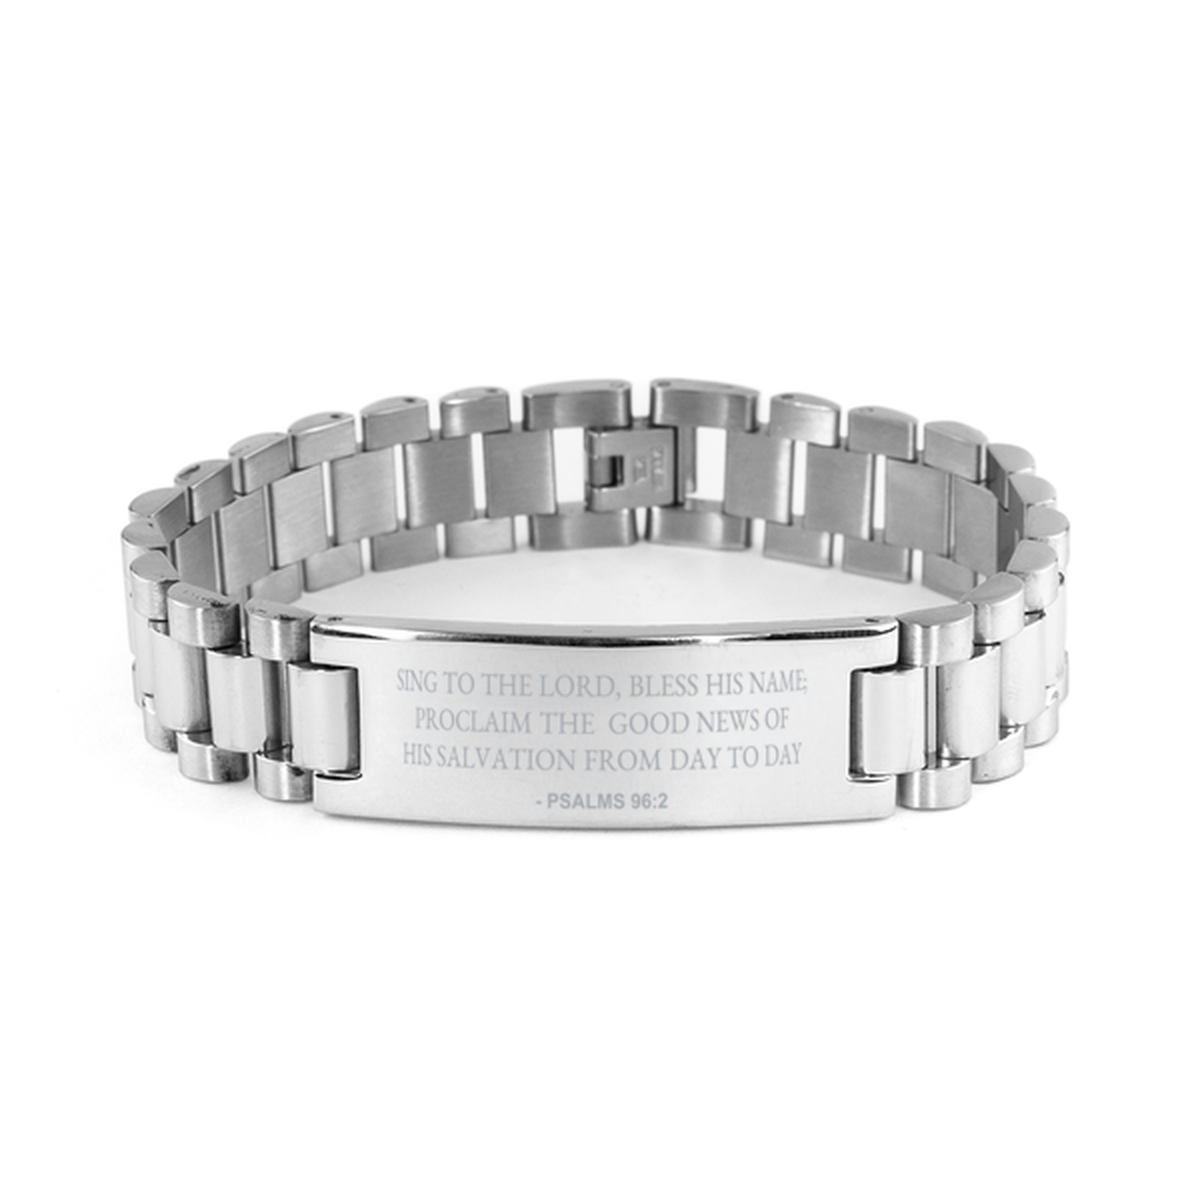 Christian Ladder Stainless Steel Bracelet, Psalms 96:2 Sing To The Lord, Bless His Name; Proclaim The, Motivational Bible Verse Gifts For Men Women